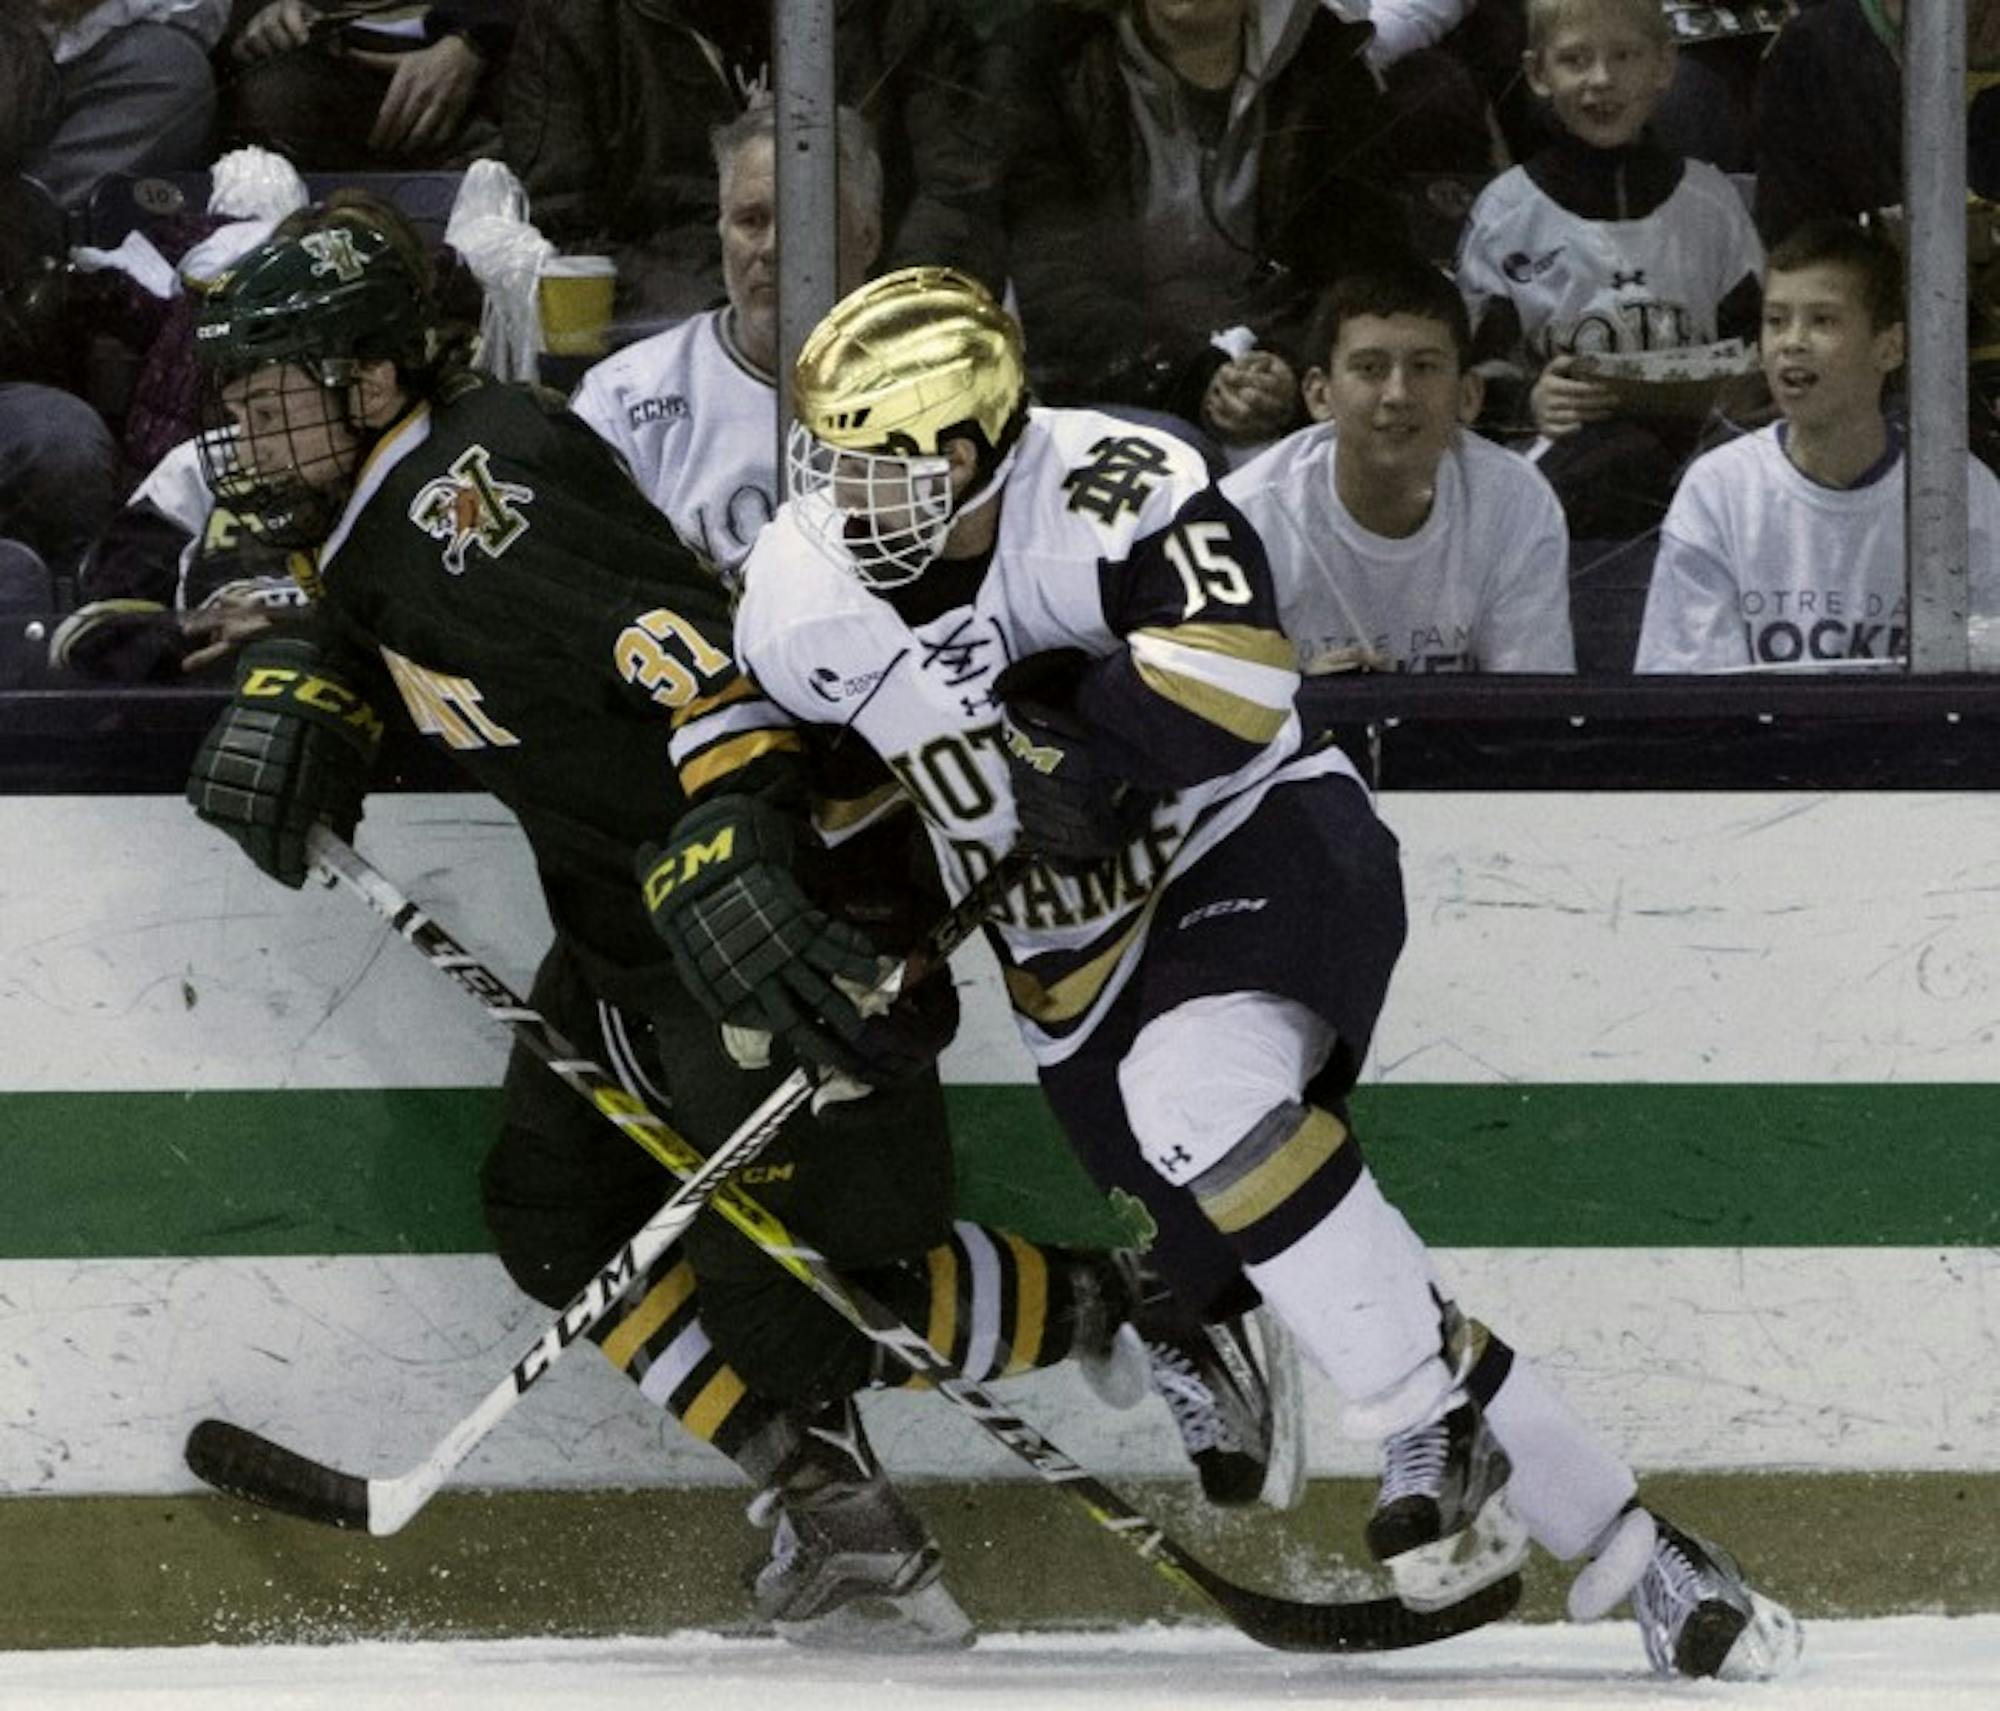 Irish sophomore forward Andrew Oglevie battles with a Vermont player along the boards during Notre Dame’s 4-4 draw with the Catamounts on Friday at Compton Family Ice Arena.